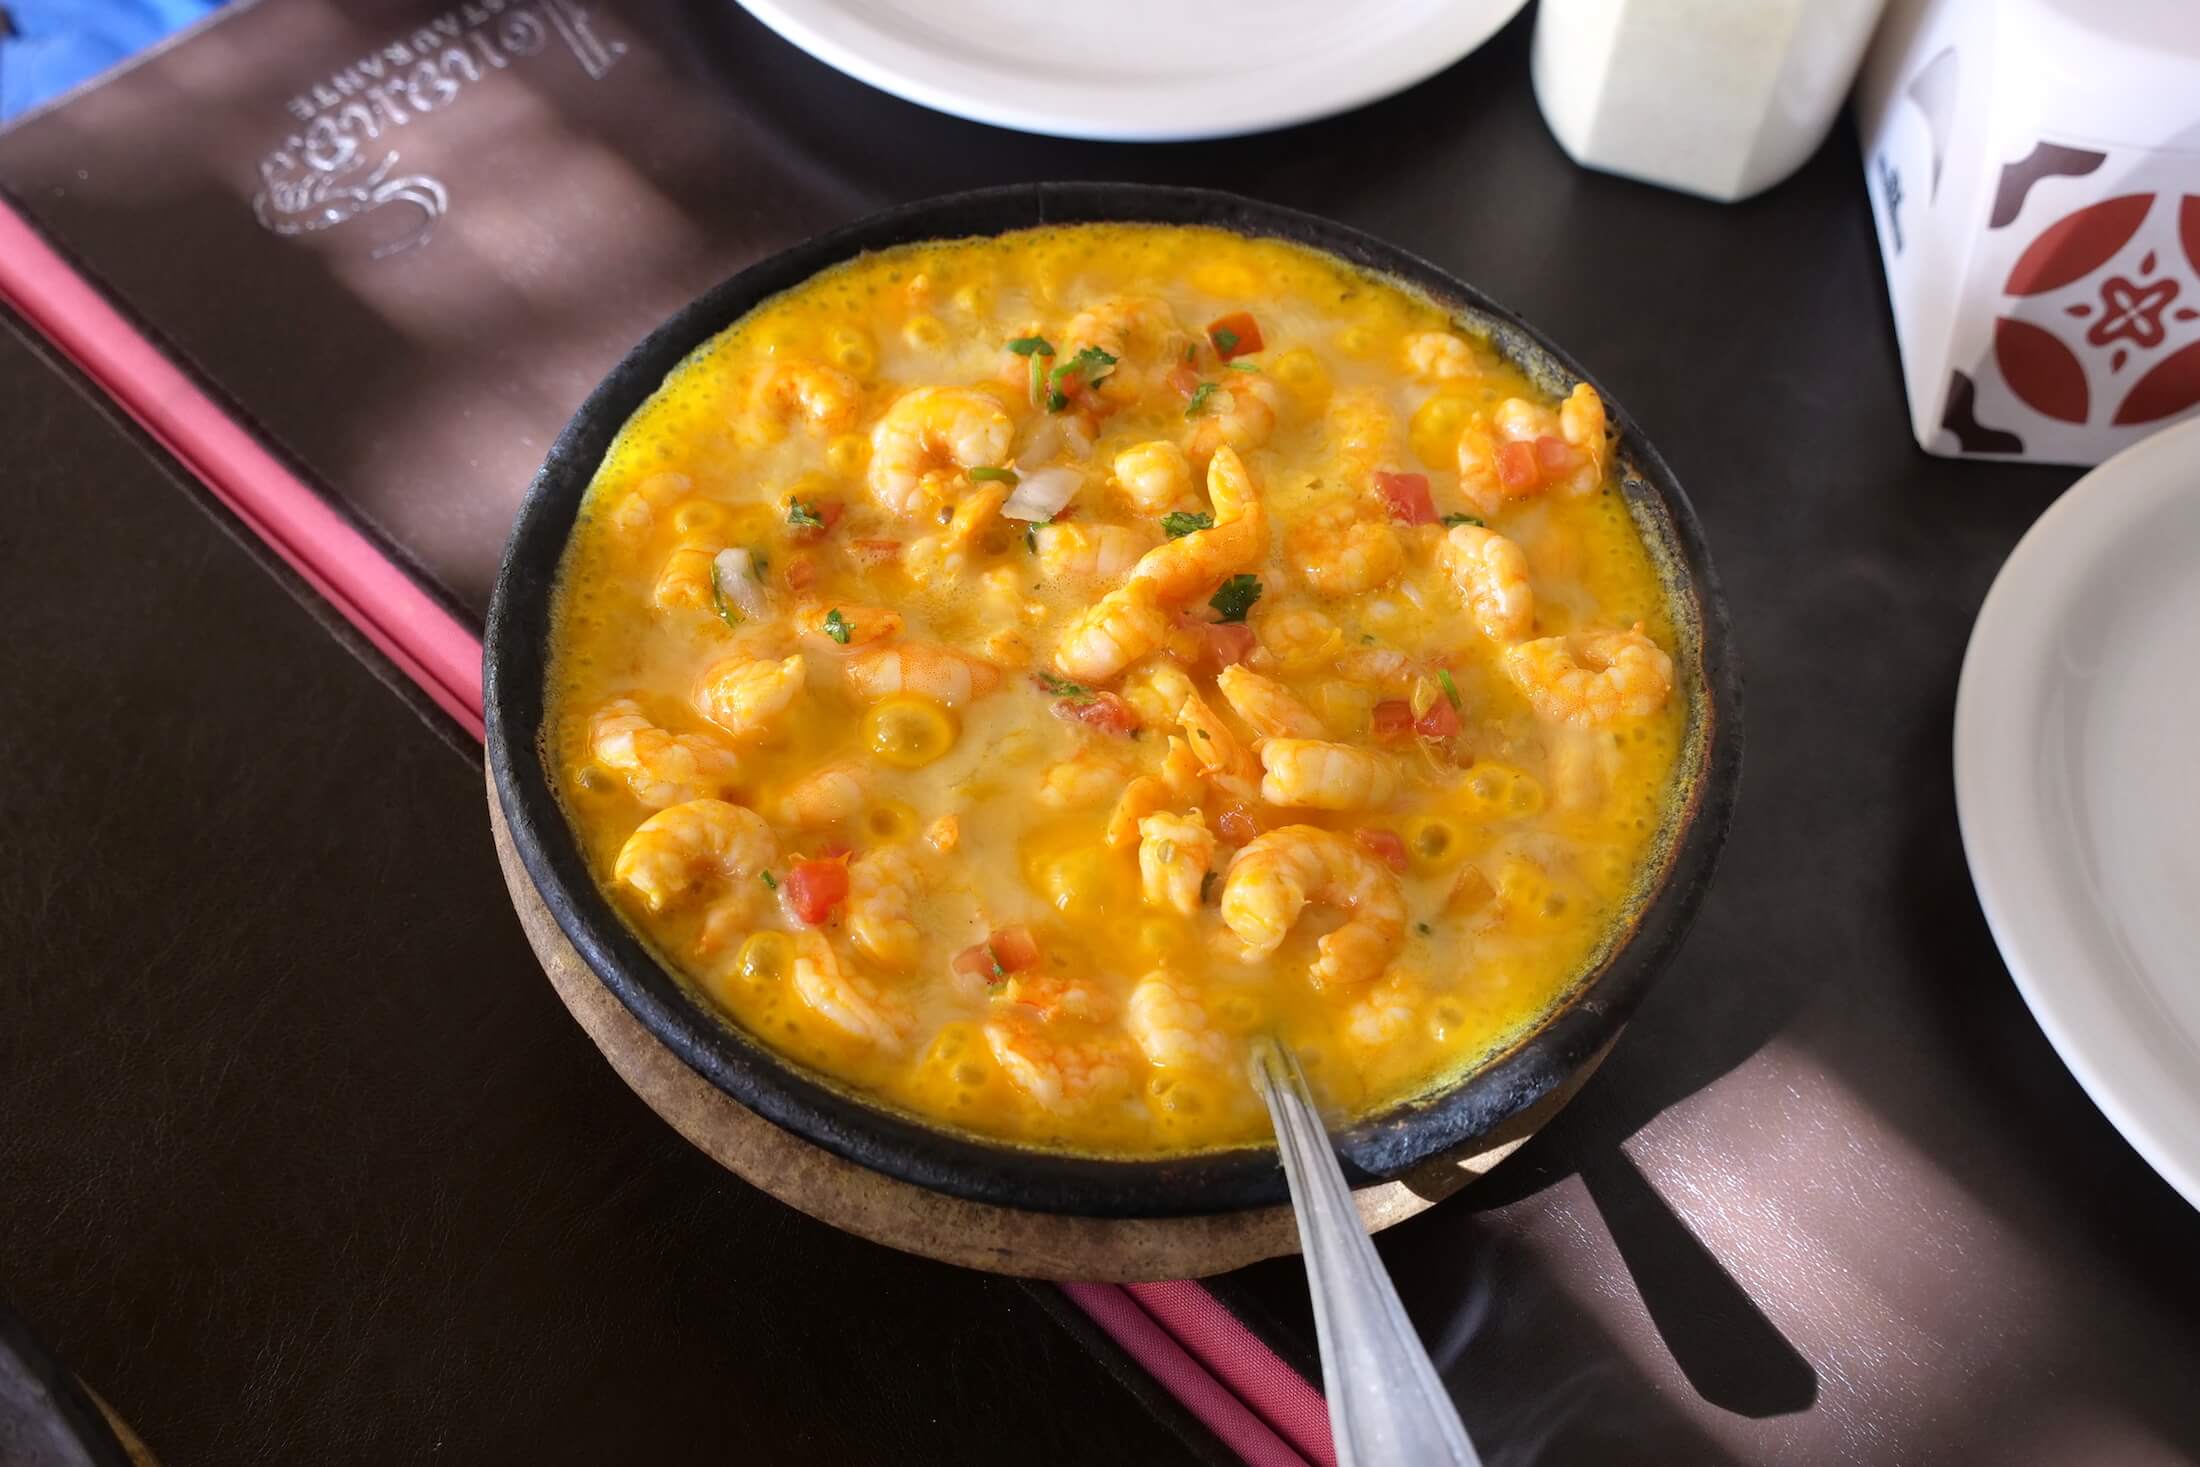 You have to have at least one meal of Moqueca when you're in Salvador